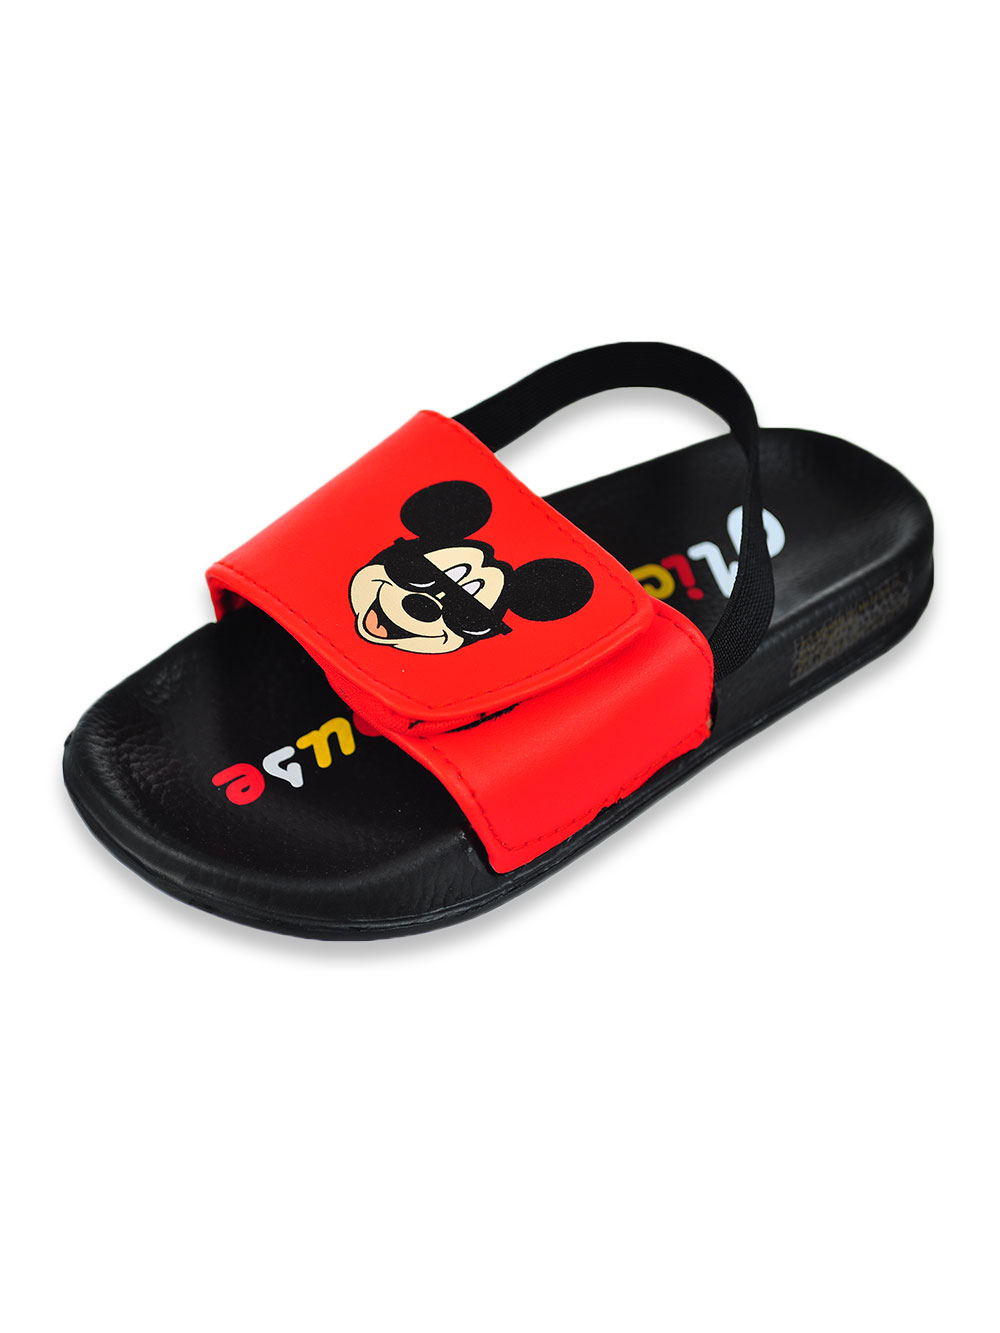 Disney Mickey Mouse Sandals